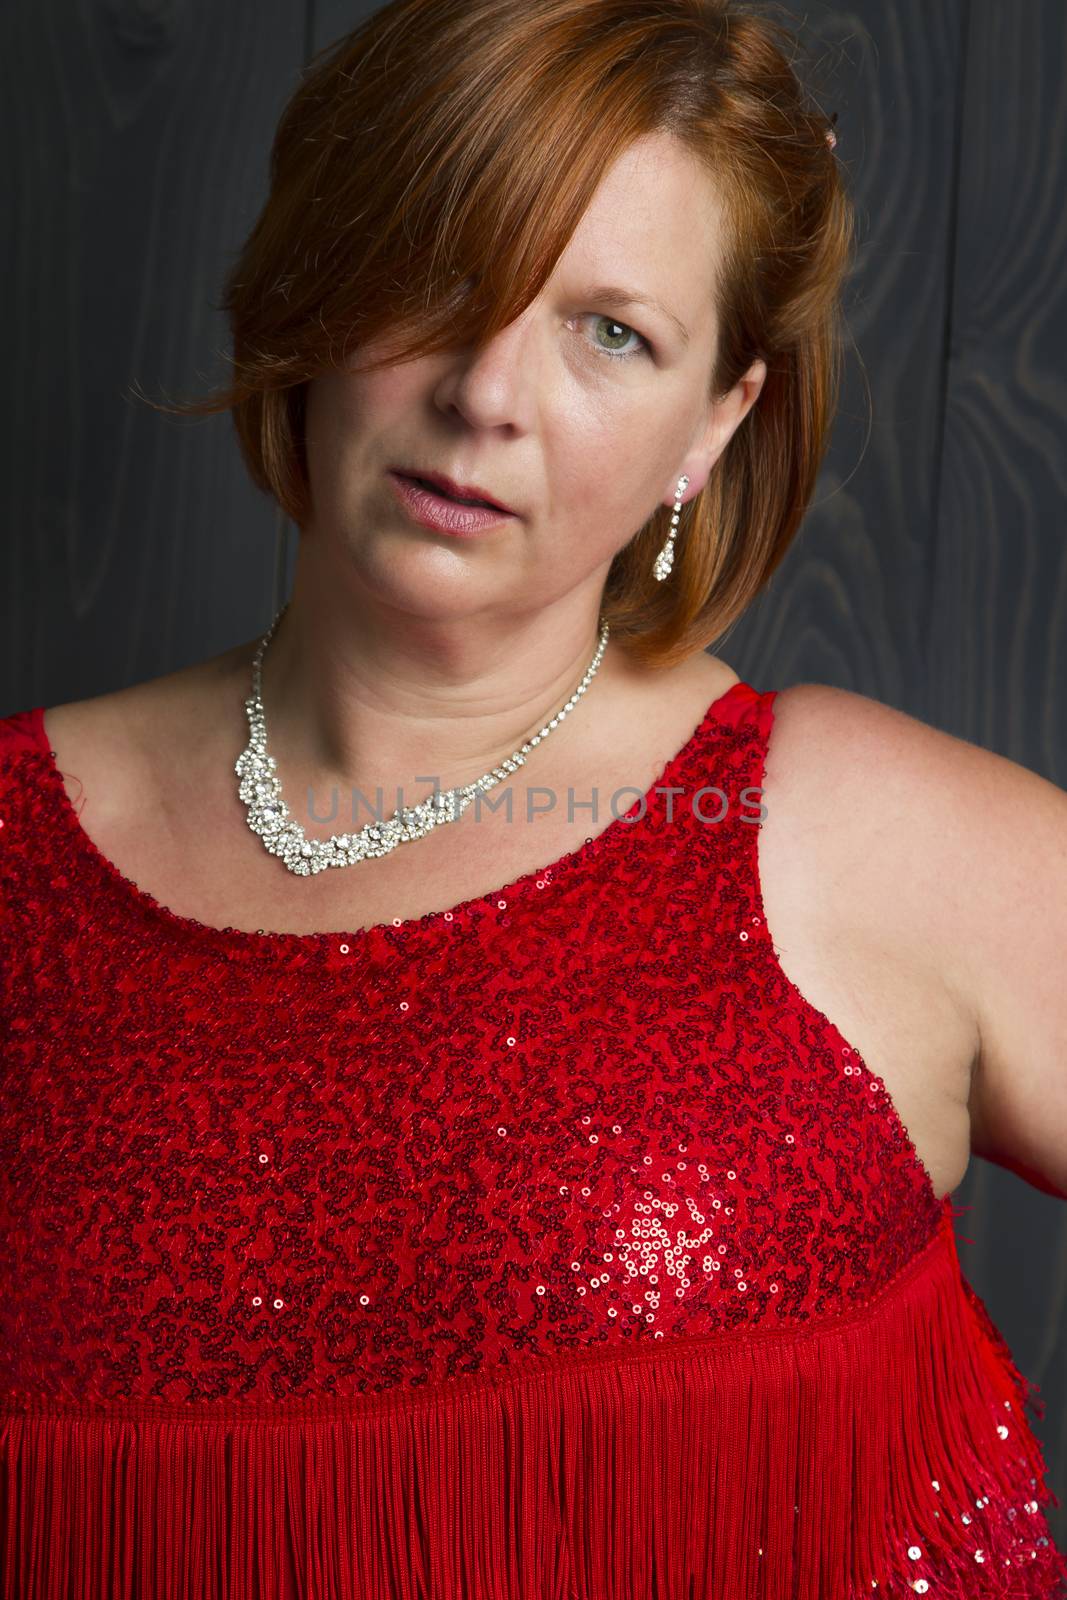 overweight forty something wearing a sparkly red dress